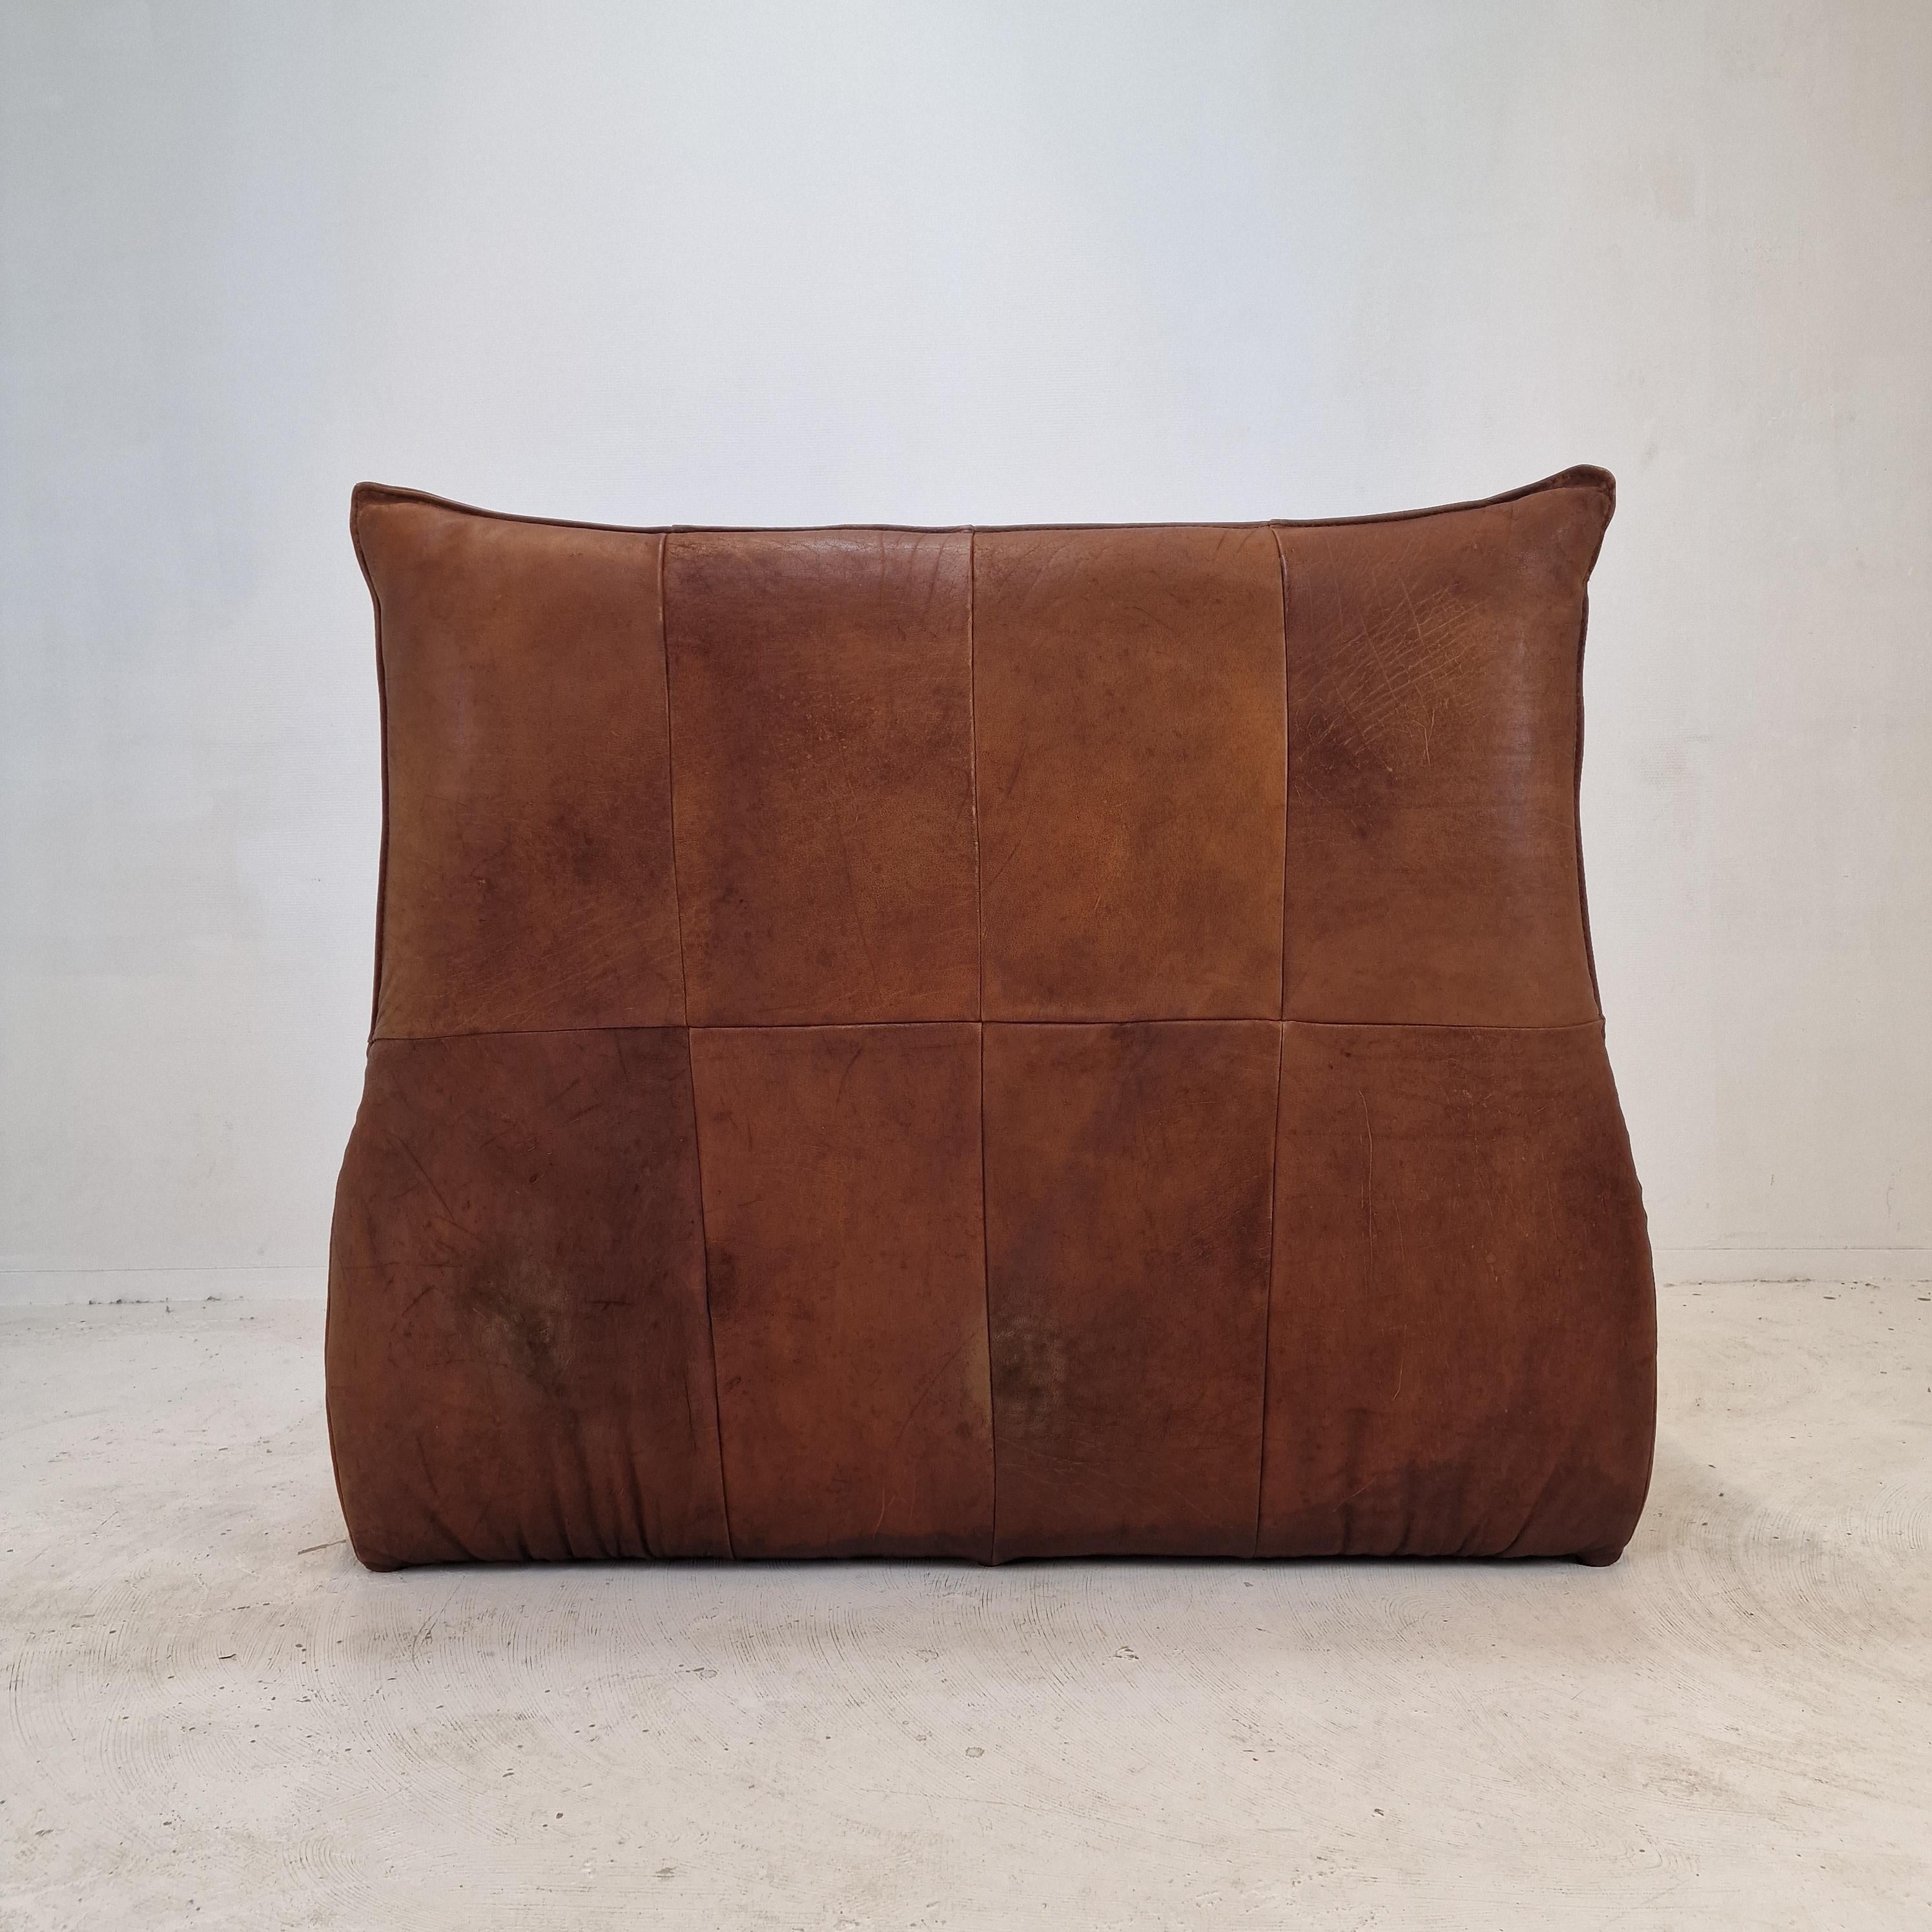 Montis “The Rock” Sofa In Brown Leather By Gerard Van Den Berg, 1970s For Sale 4